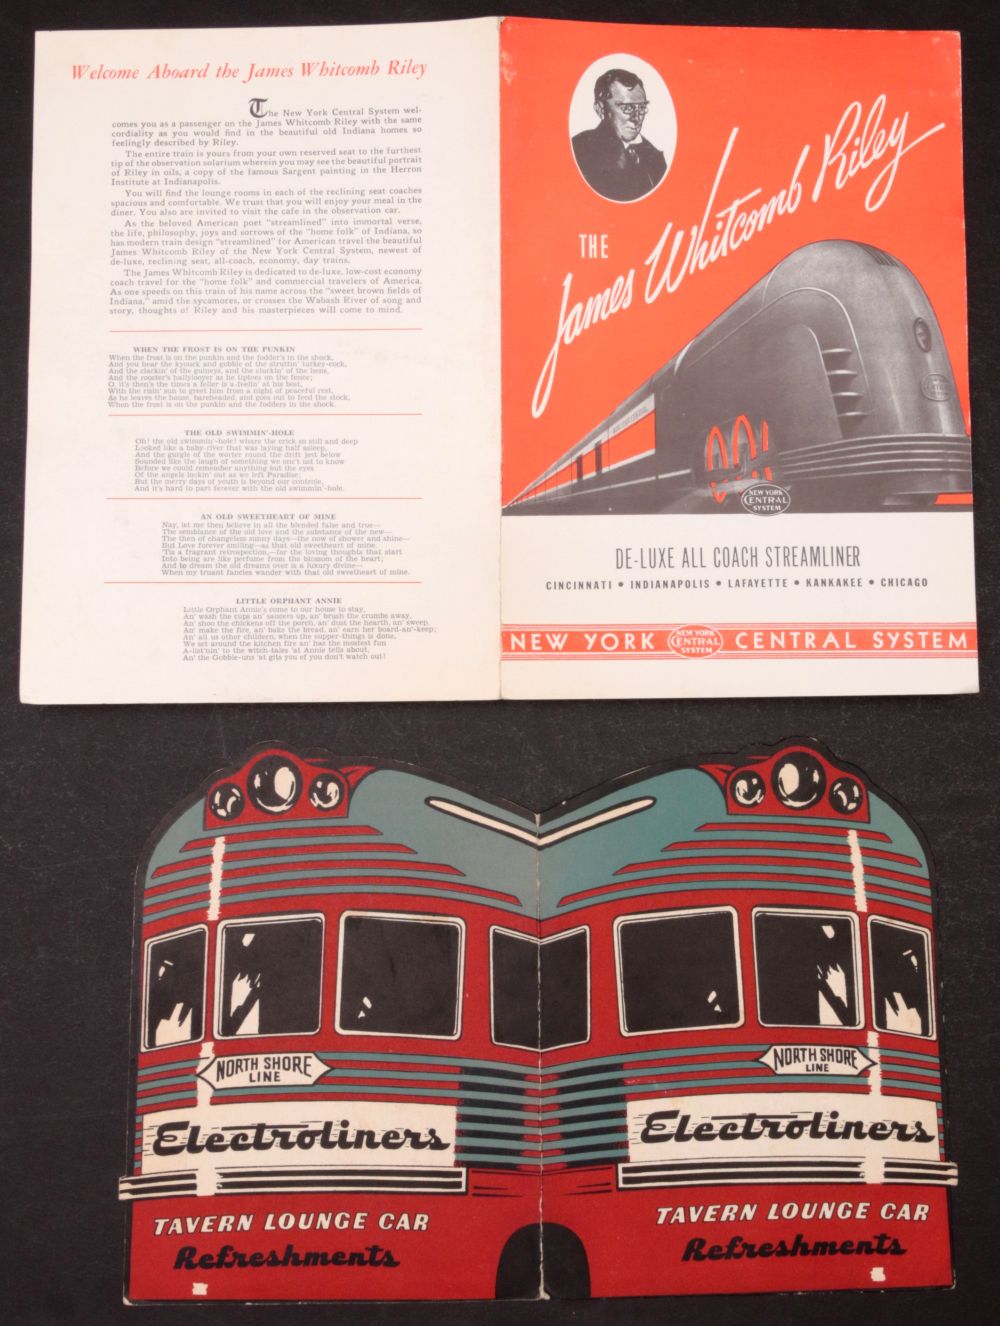 A COLLECTION OF RAILROAD DINING CAR MENUS 1904-1977